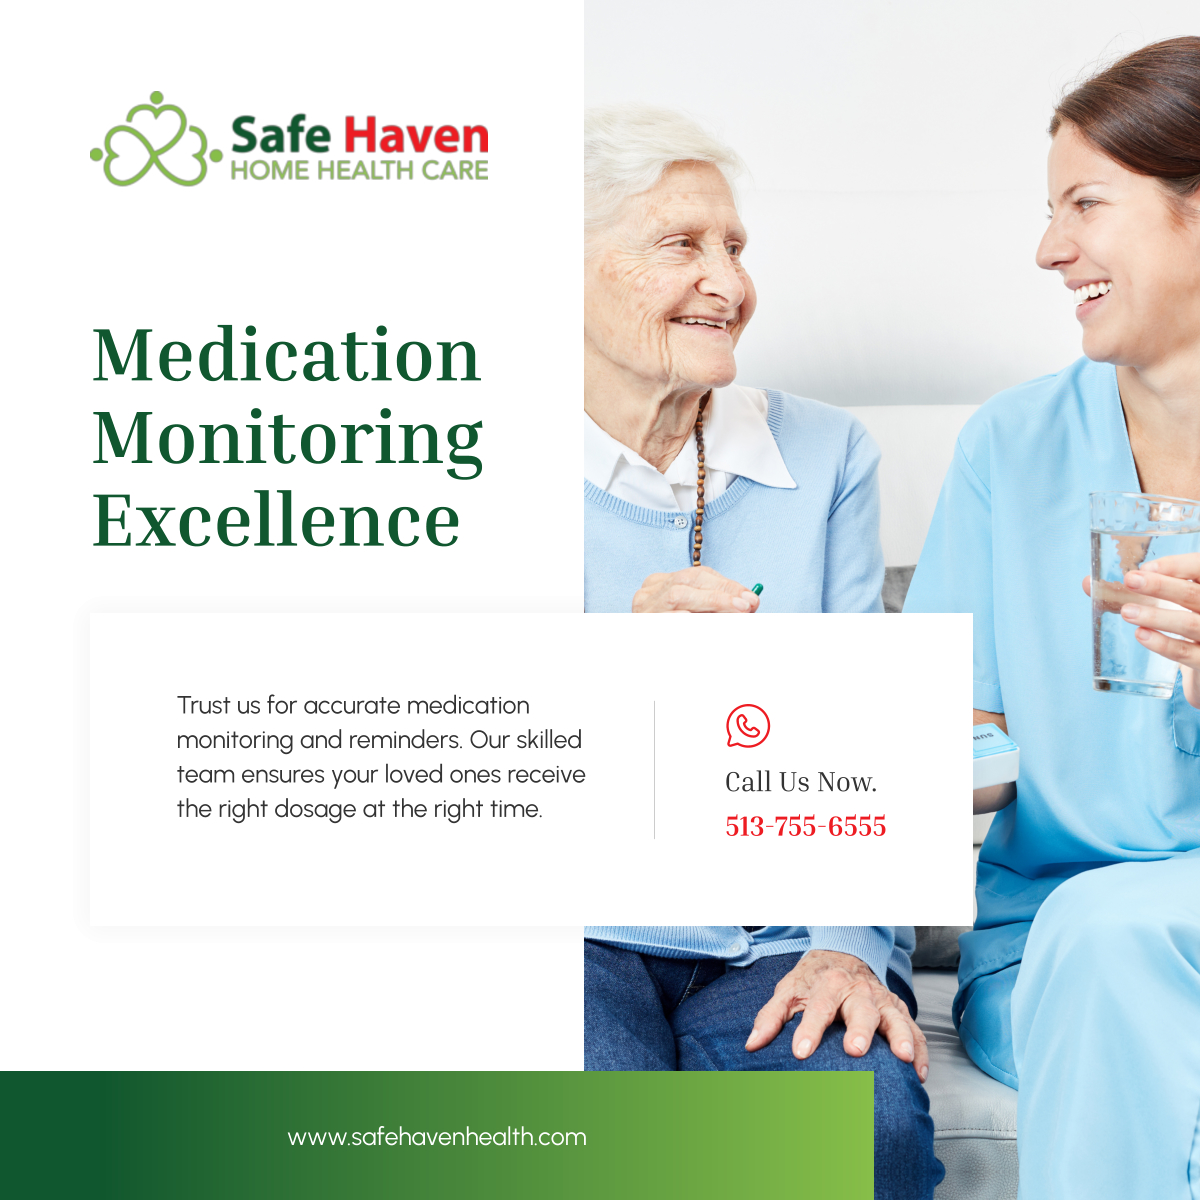 Rest easy with our medication monitoring. Our skilled team ensures accurate reminders and timely dosage, prioritizing your health and well-being. 

#HomeHealthcare #CincinnatiOH #MedicationMonitoring